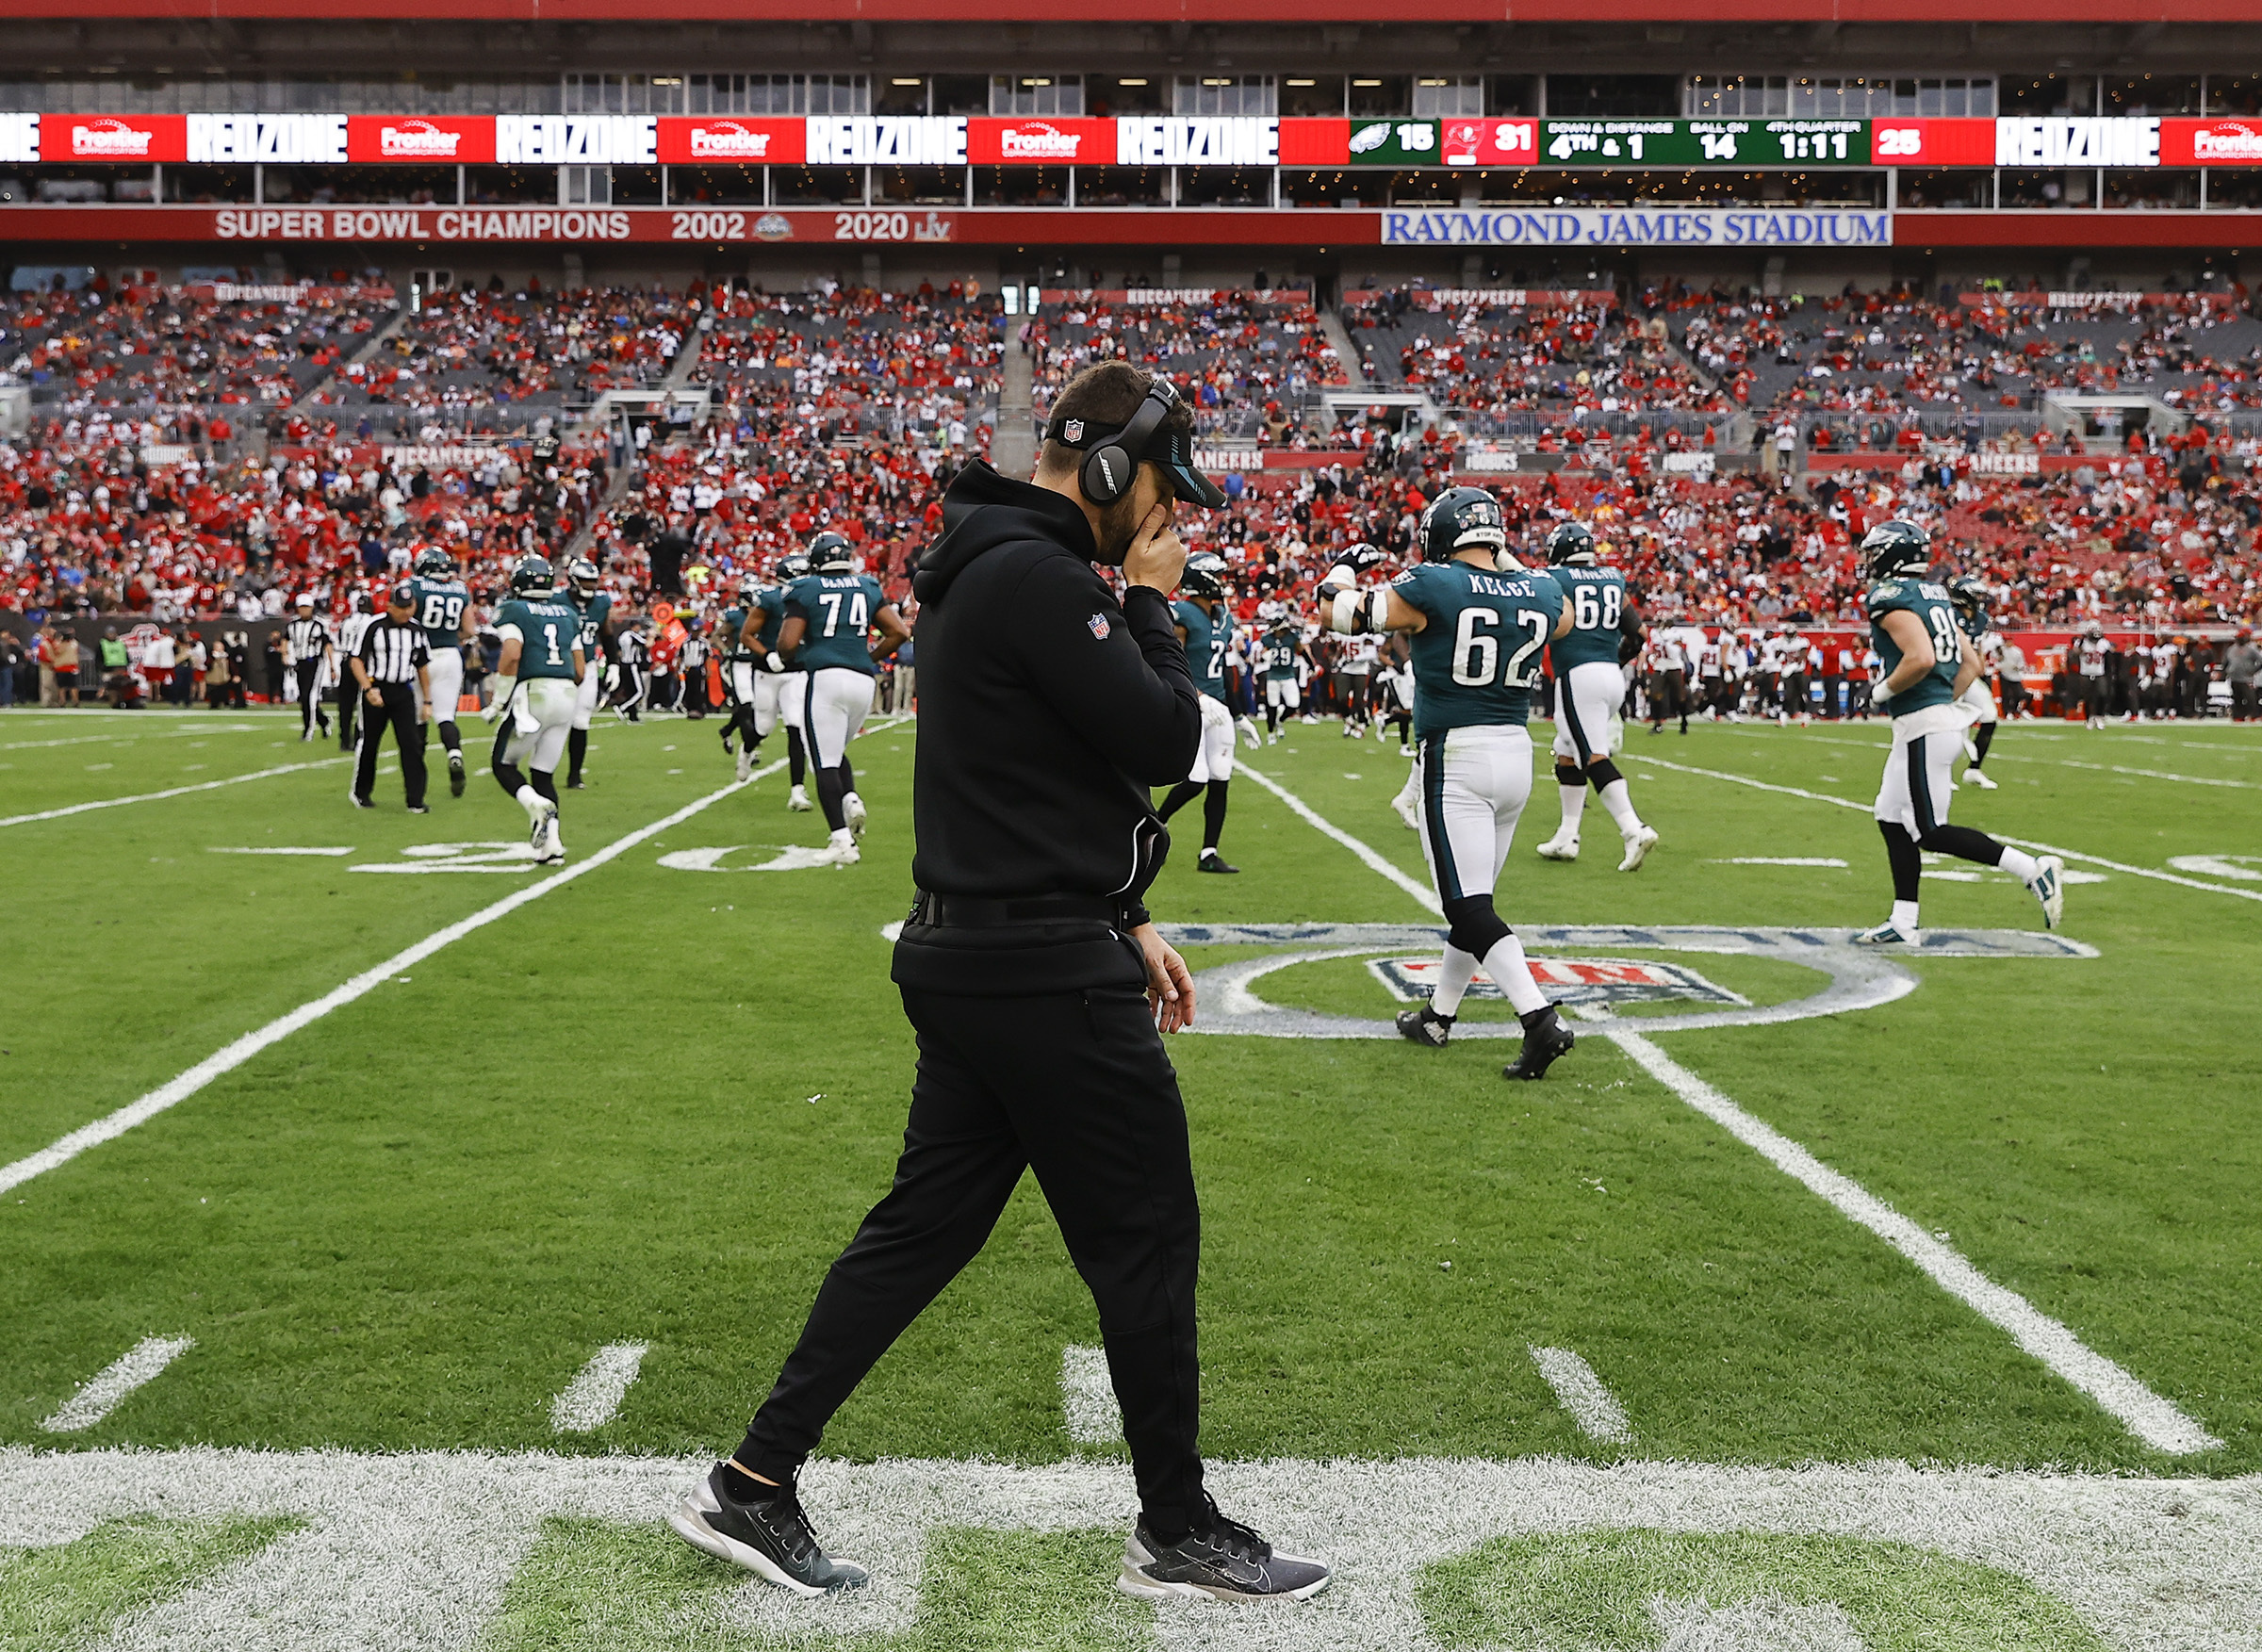 Photos from the Eagles' 31-15 playoff loss to the Tampa Bay Buccaneers